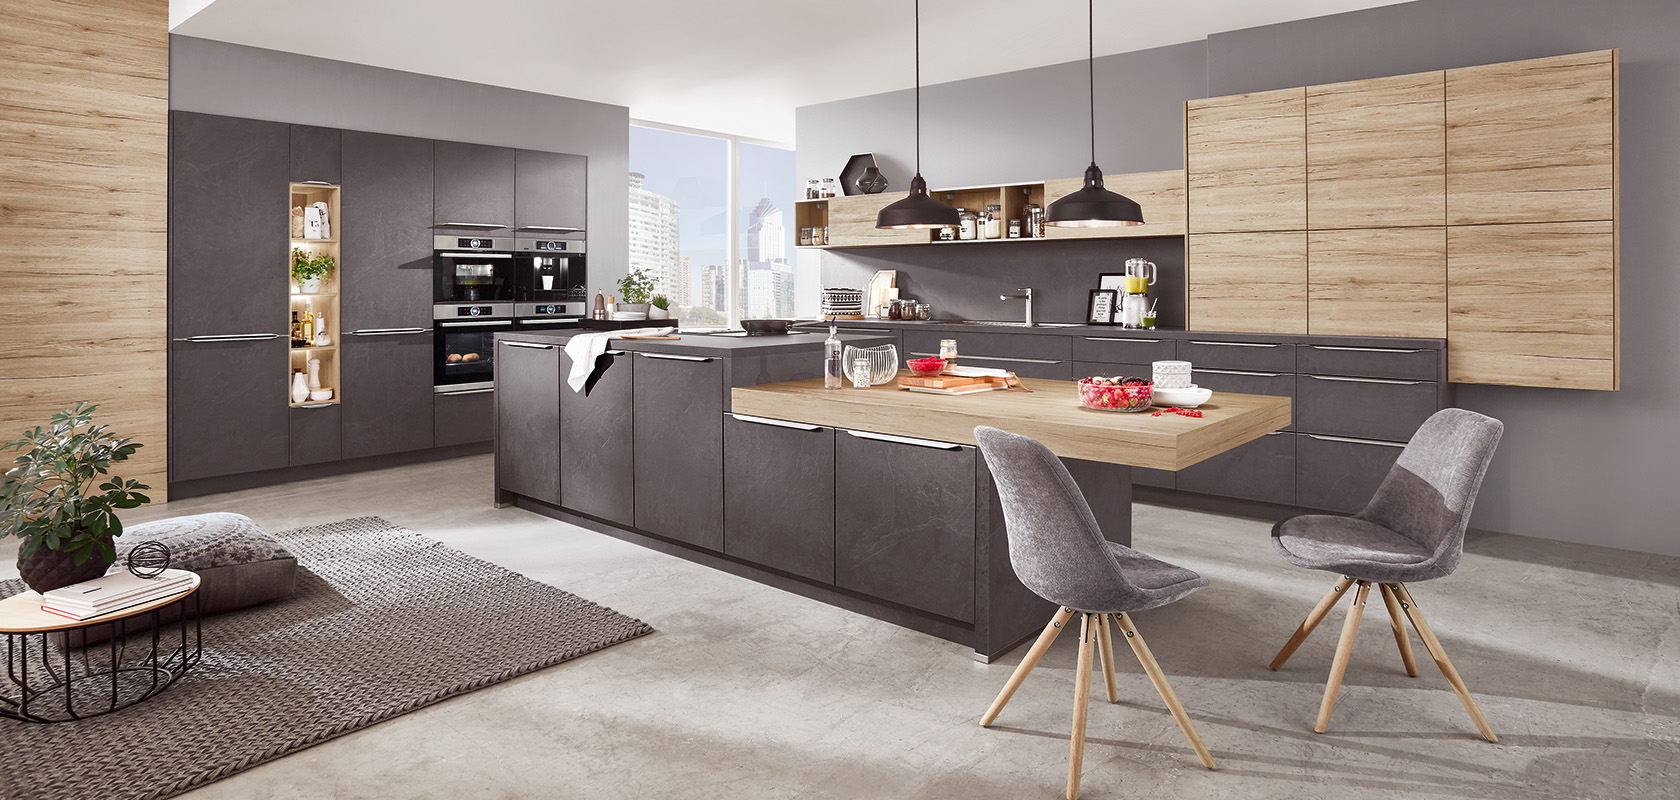 Modern kitchen interior design featuring sleek gray and wood cabinets, integrated appliances, and a stylish dining area with comfortable seating and city views.